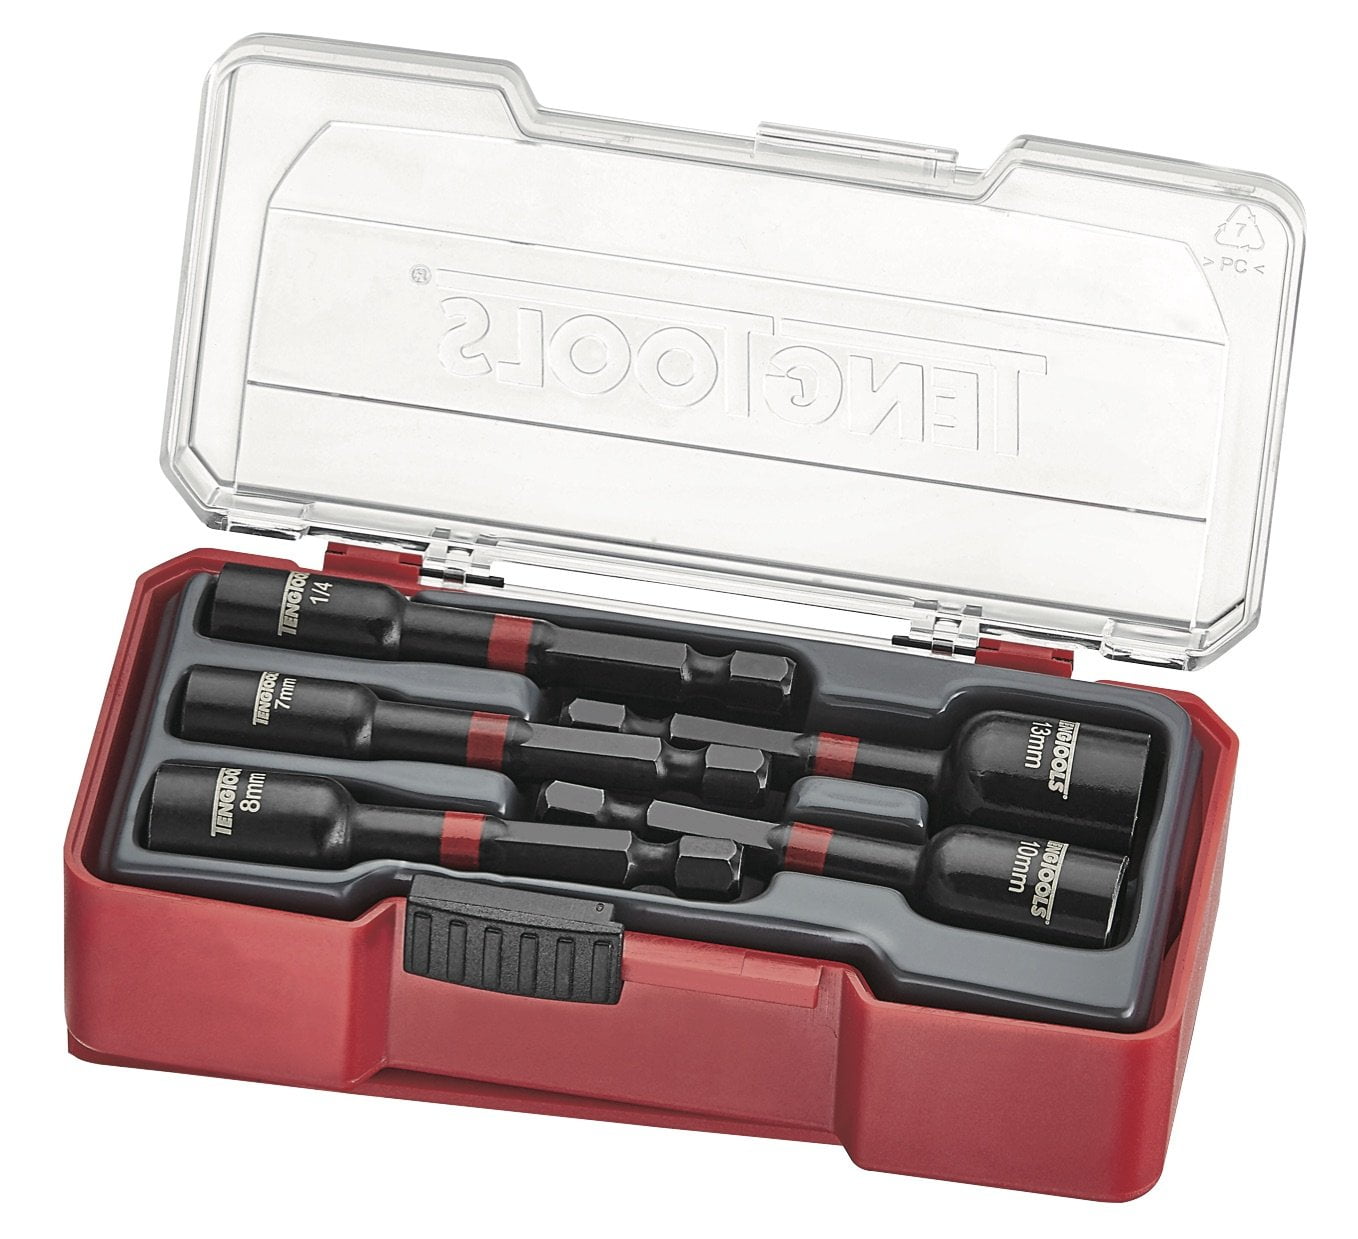 Teng Tools 5 Piece 1/4 Inch Hex Drive 6 Point Metric & SAE Impact Nut Setter Driver Set - TJNS05